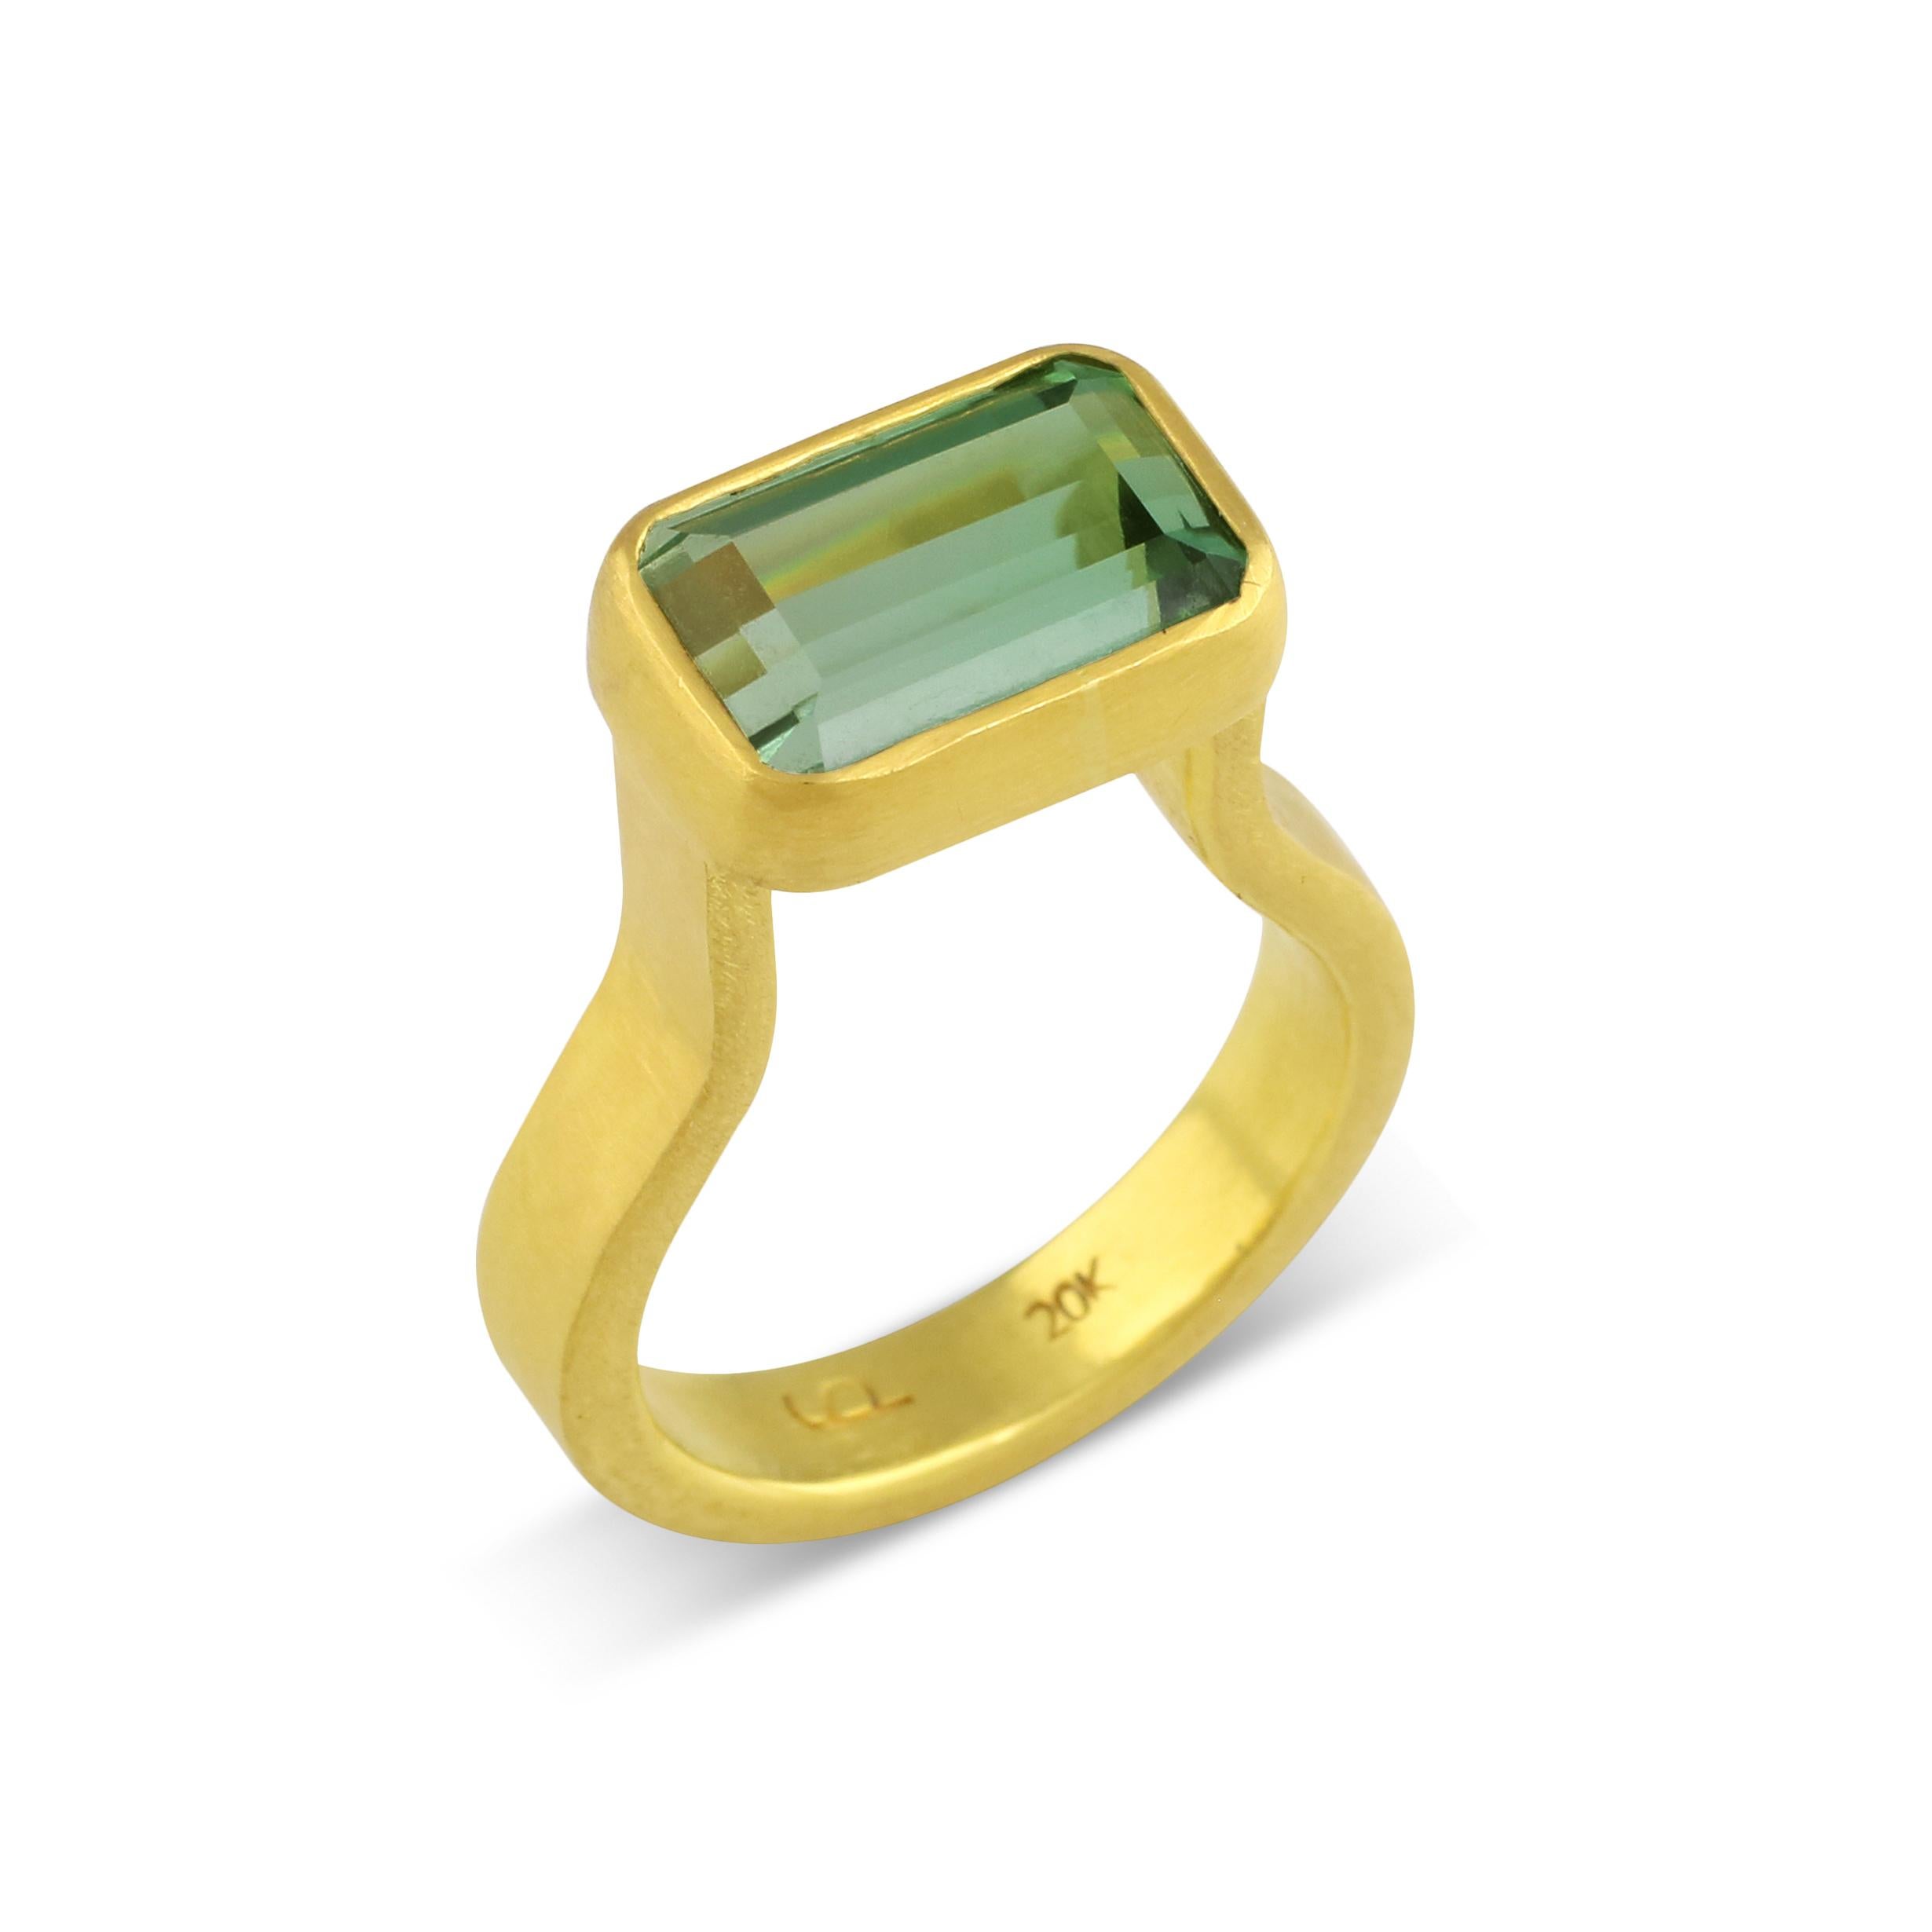 Artisan PHILIPPE SPENCER 5.26 Ct. Green Tourmaline in 22K and 20K Gold Statement Ring For Sale